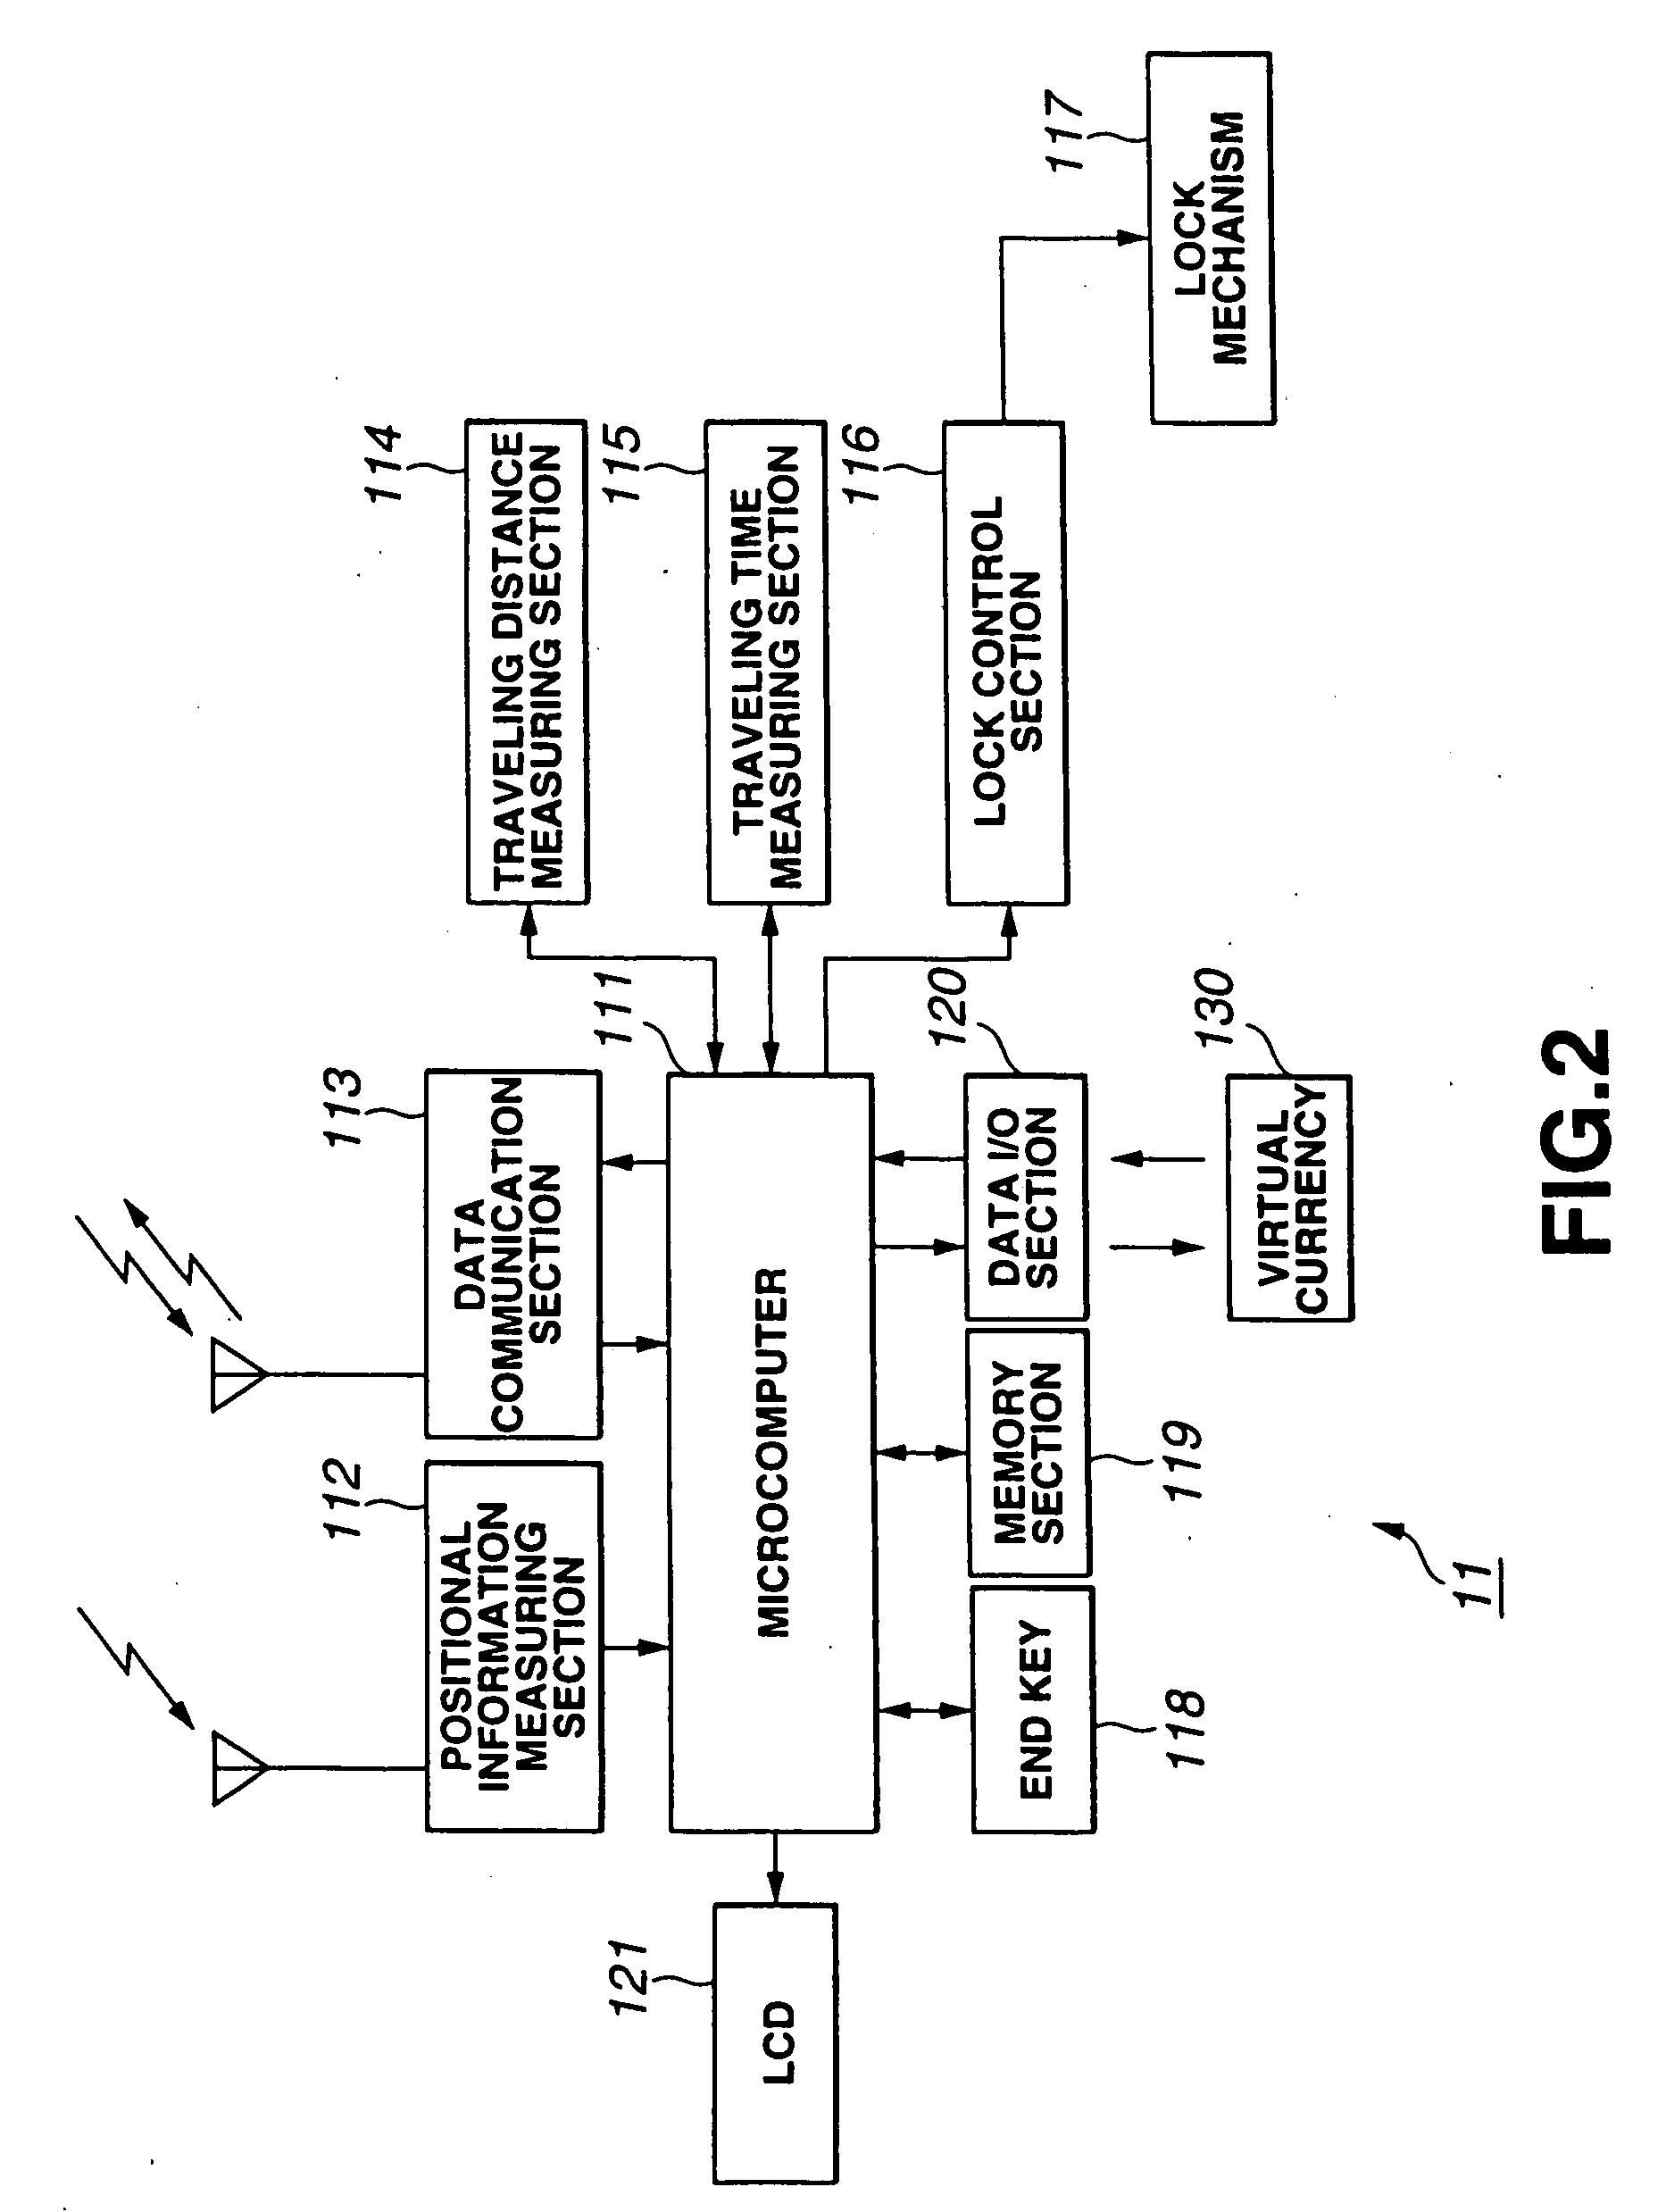 Rental system for movable body such as vehicle